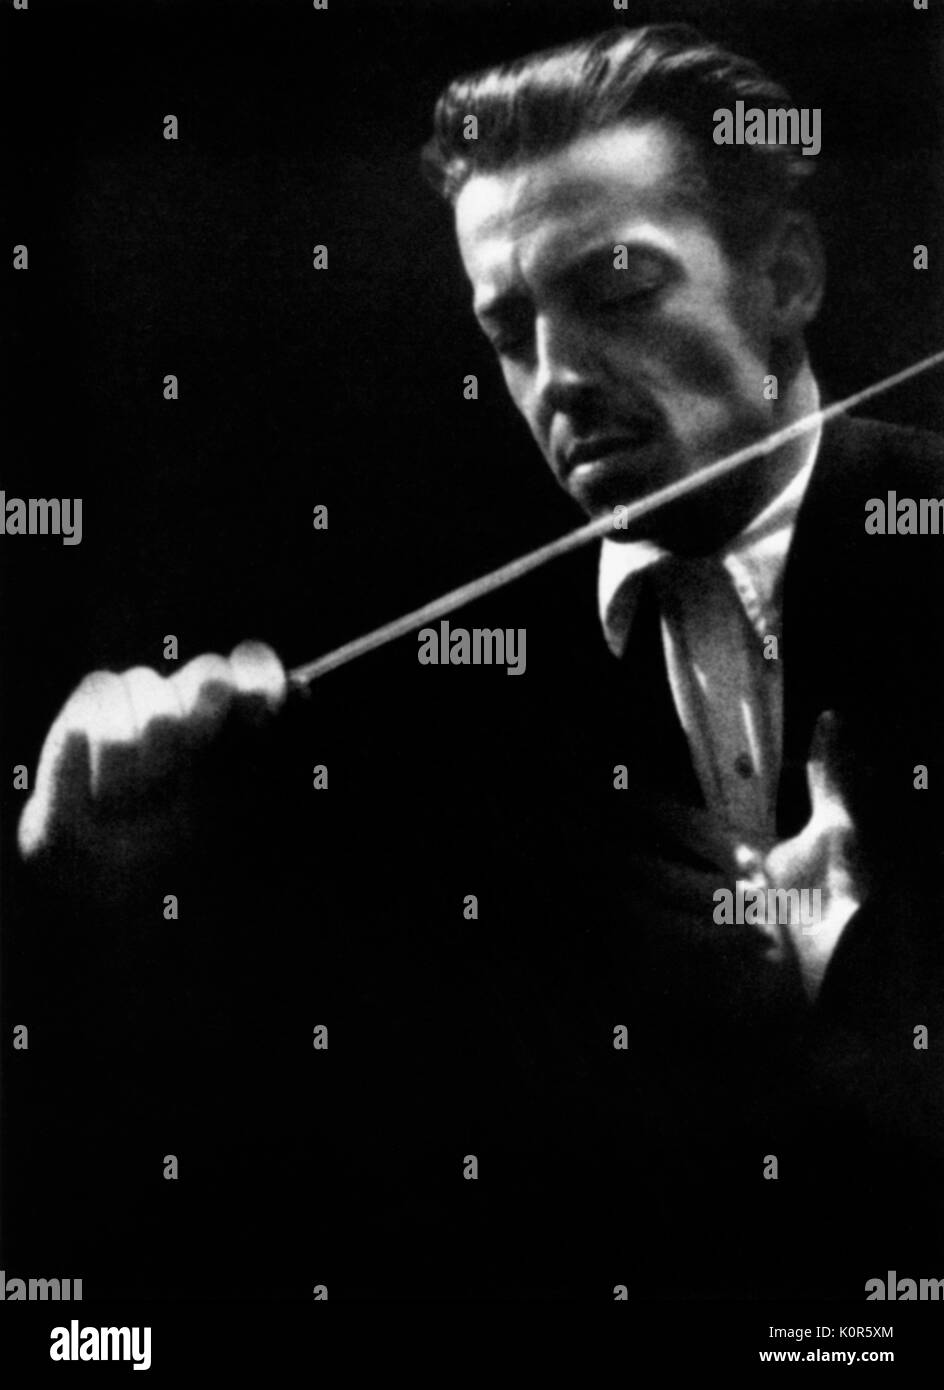 Herbert von Karajan - portrait of the Austrian conductor conducting with baton in early 1940s. 5 April 1908 - 16 July 1989. Stock Photo